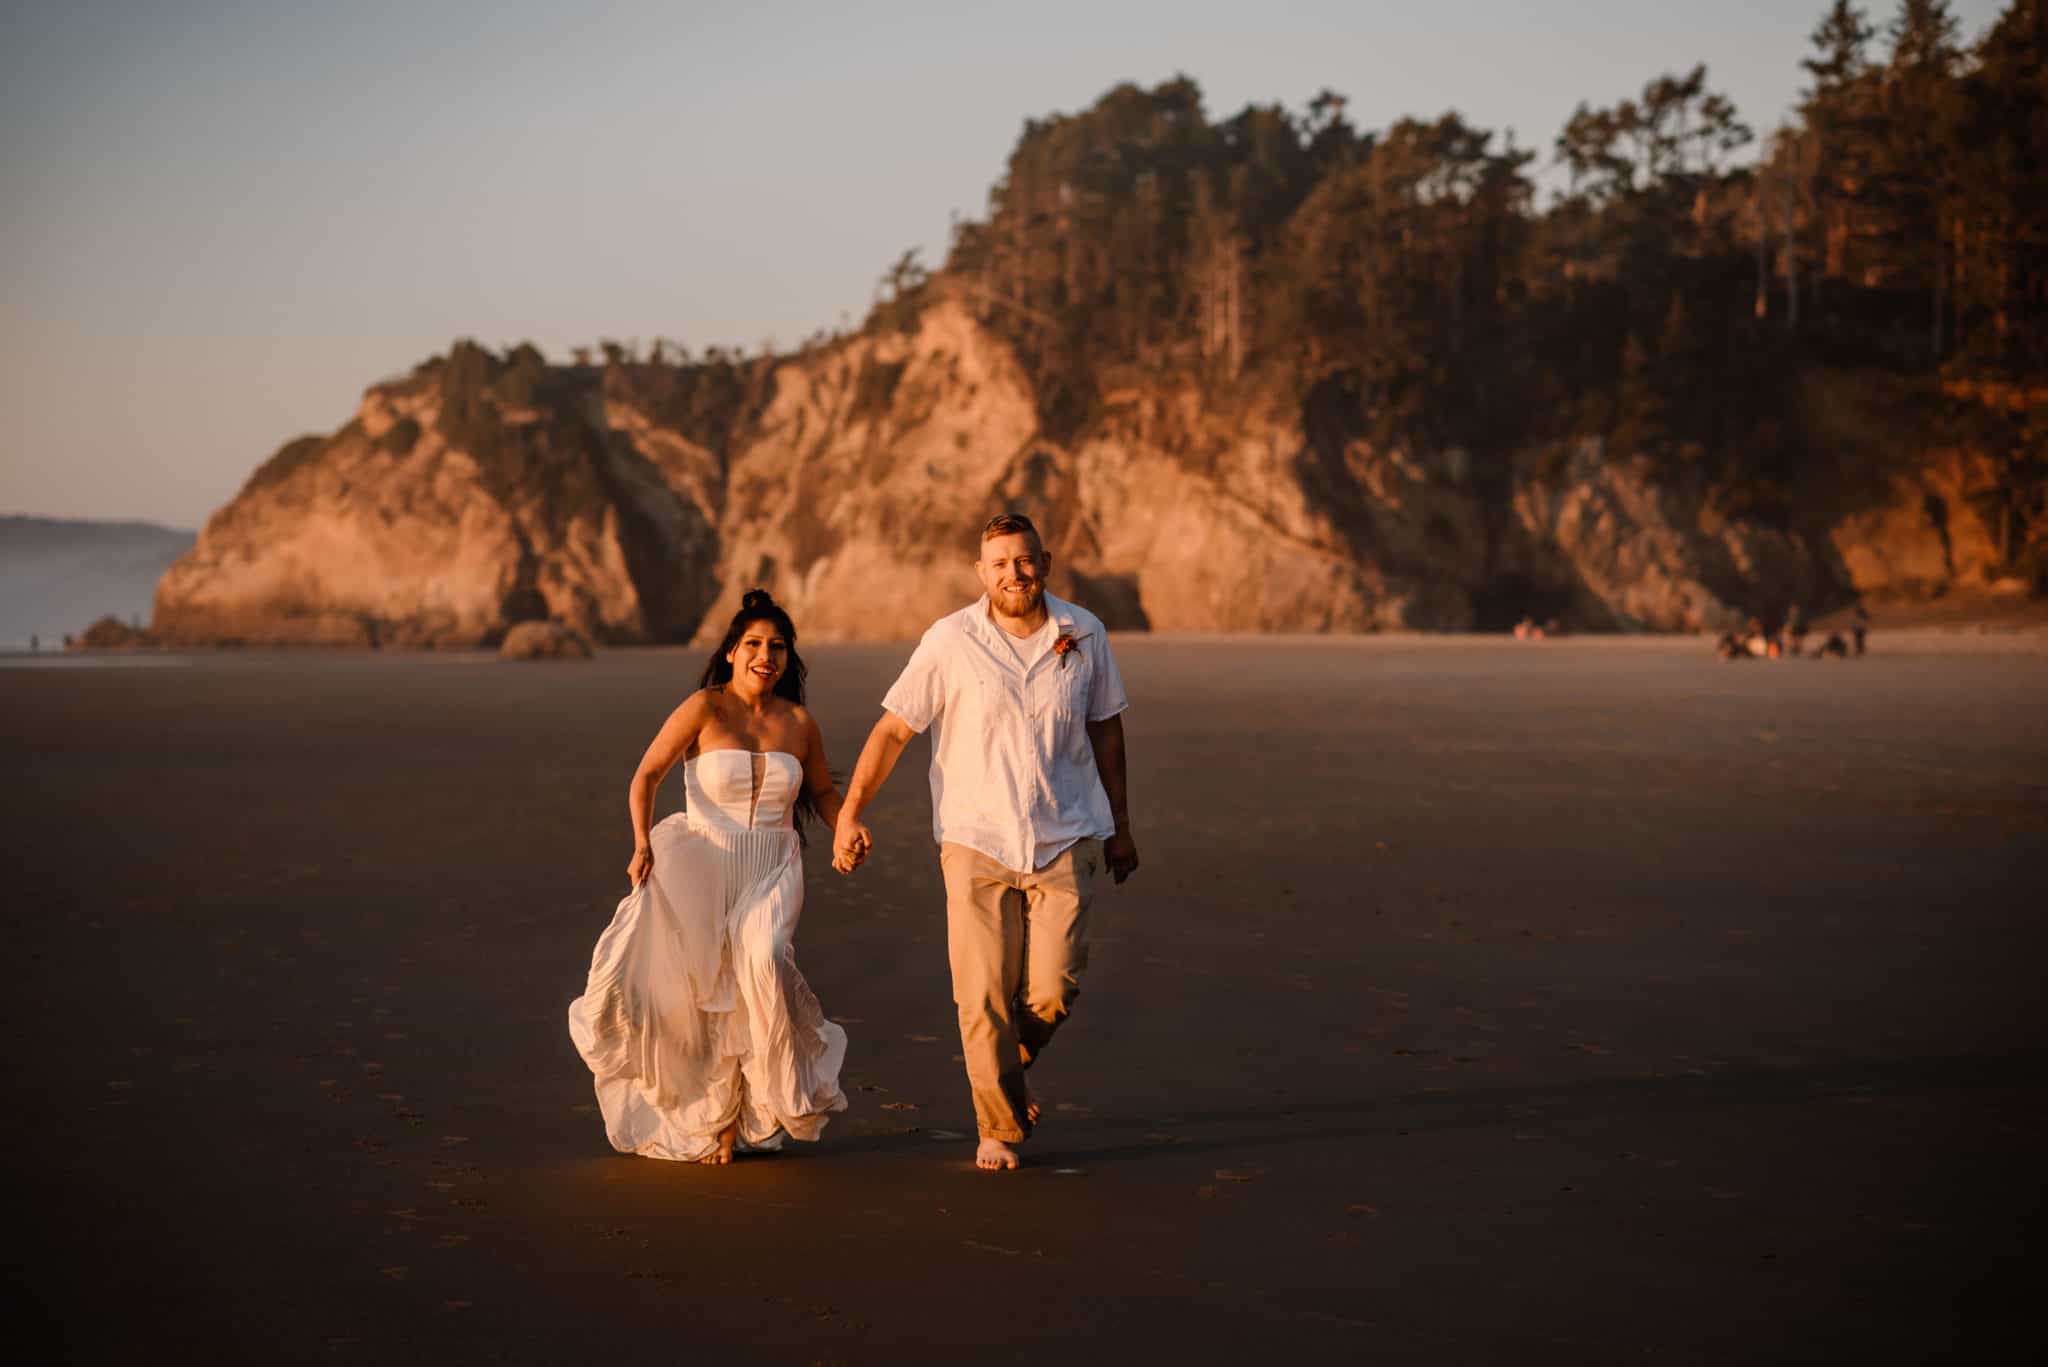 After choosing their favorite elopement locations Couple explores Hug Point after their elopement during sunset